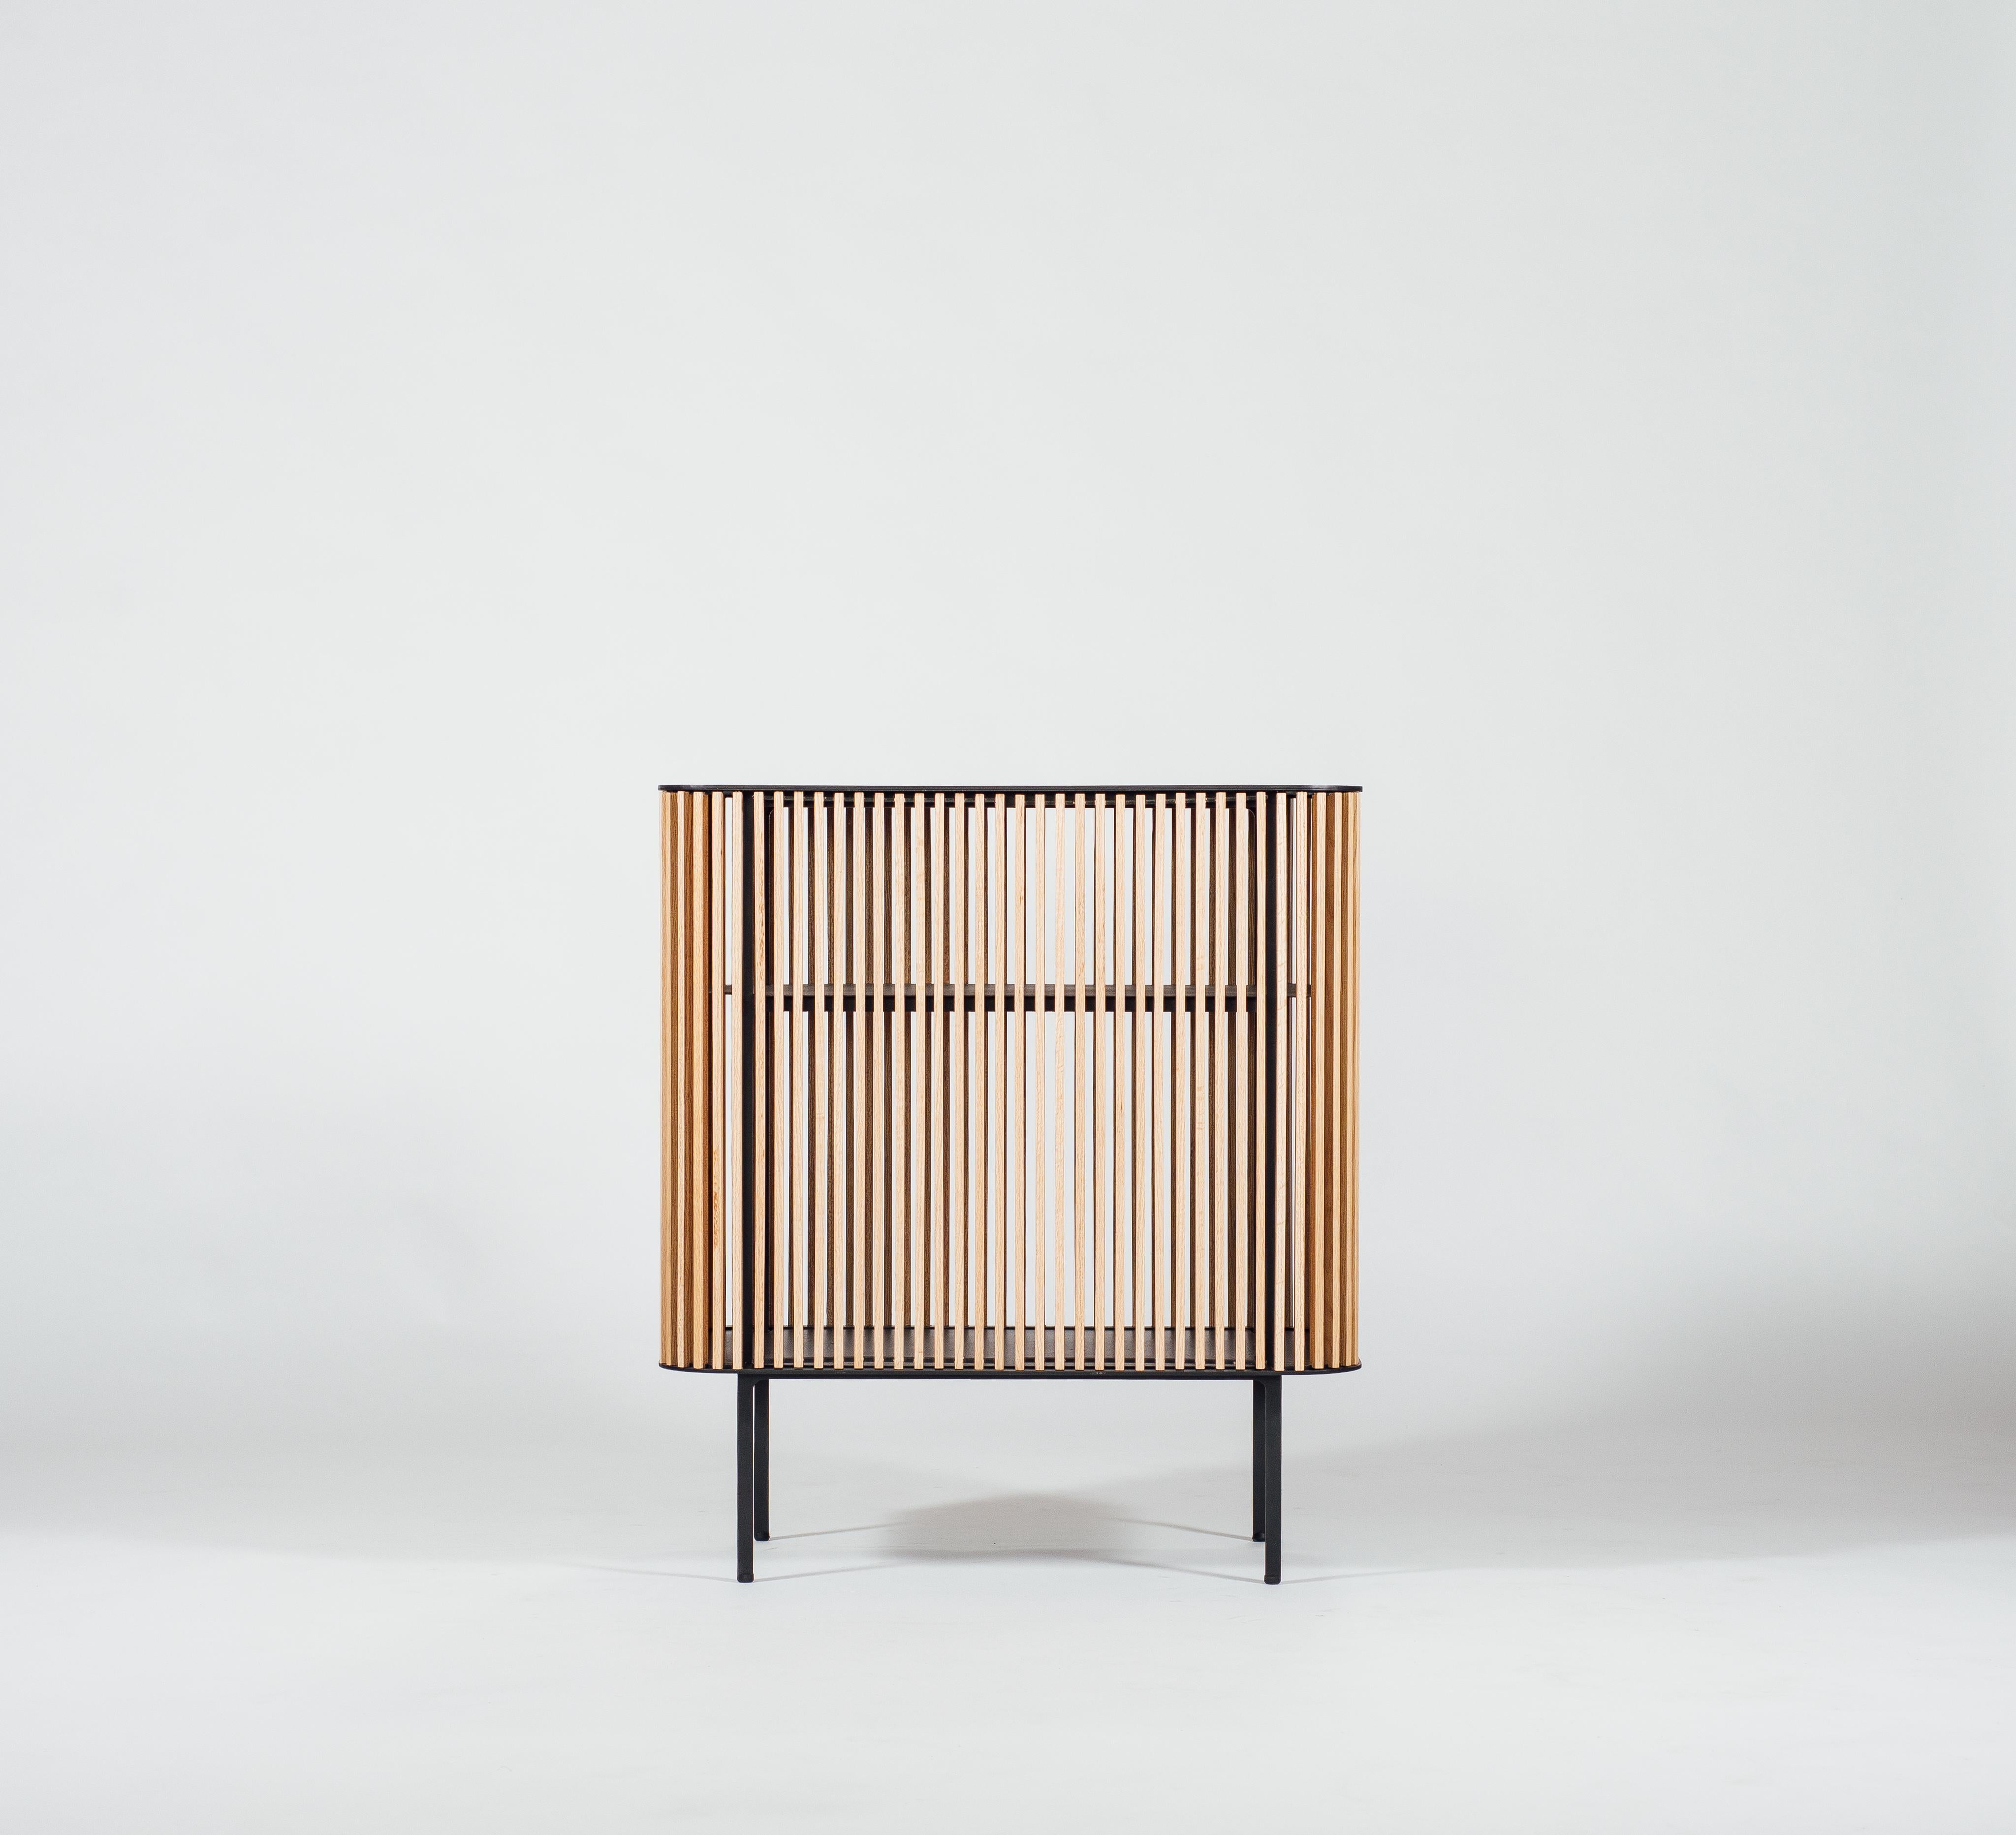 Be it in the gentleman’s corner of your apartment or centre stage in your living room, this contemporary Dry Bar in its simplicity, serves as a humble vessel for your most precious liquids. The opacity of the ribbed wood enclosure allows for one’s